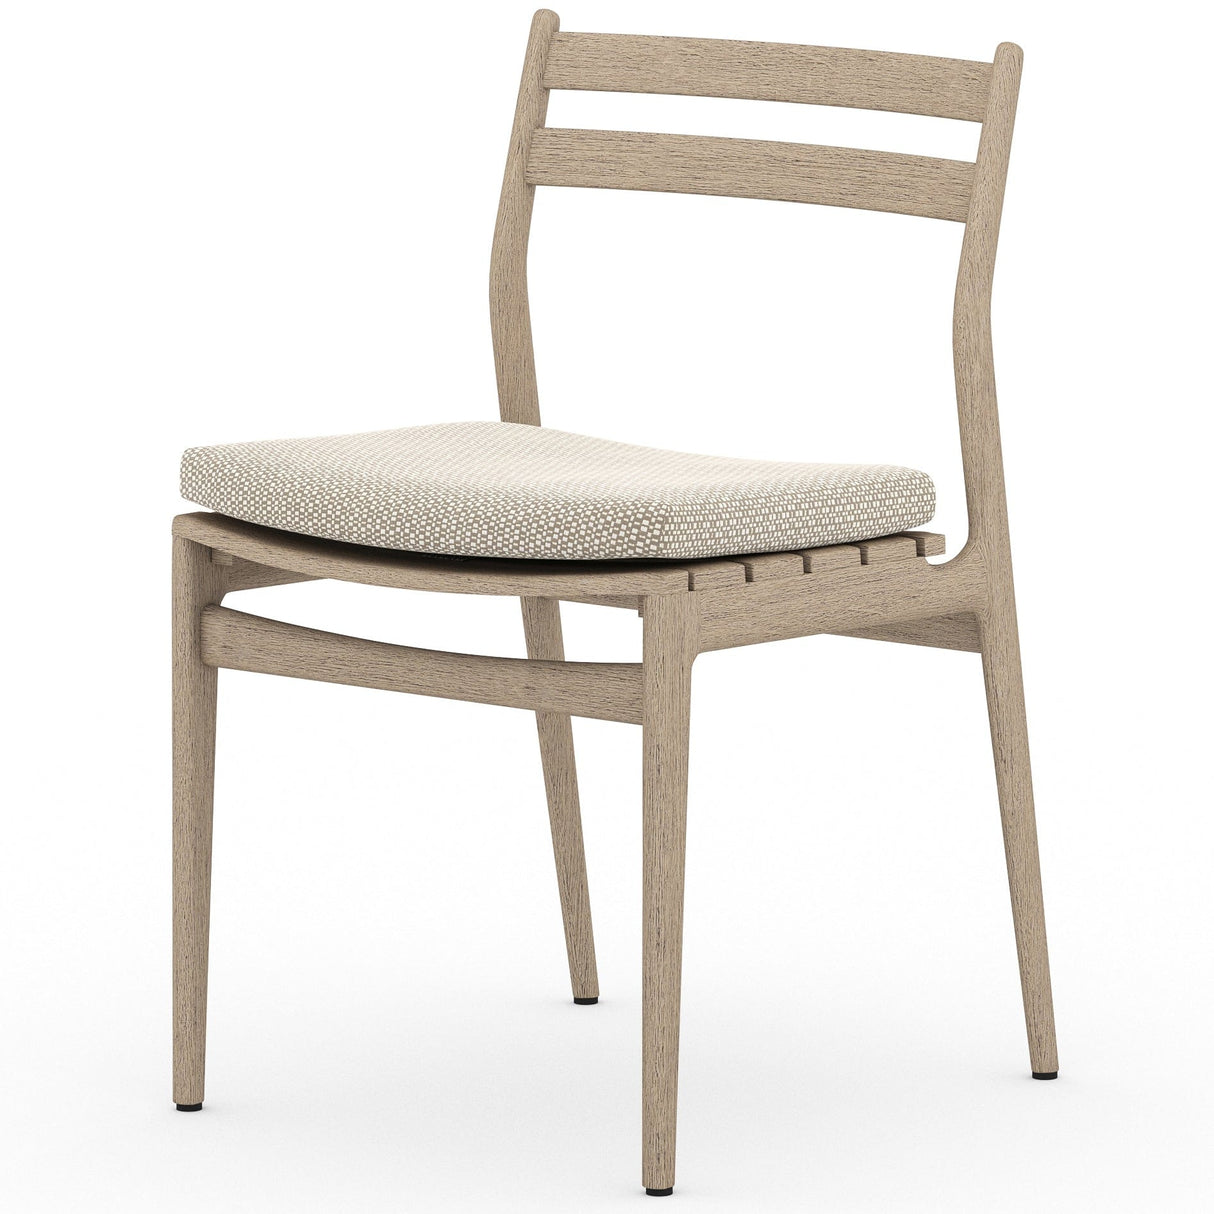 Four Hands Atherton Outdoor Dining Chair Outdoor Furniture four-hands-JSOL-08302K-971 801542492359